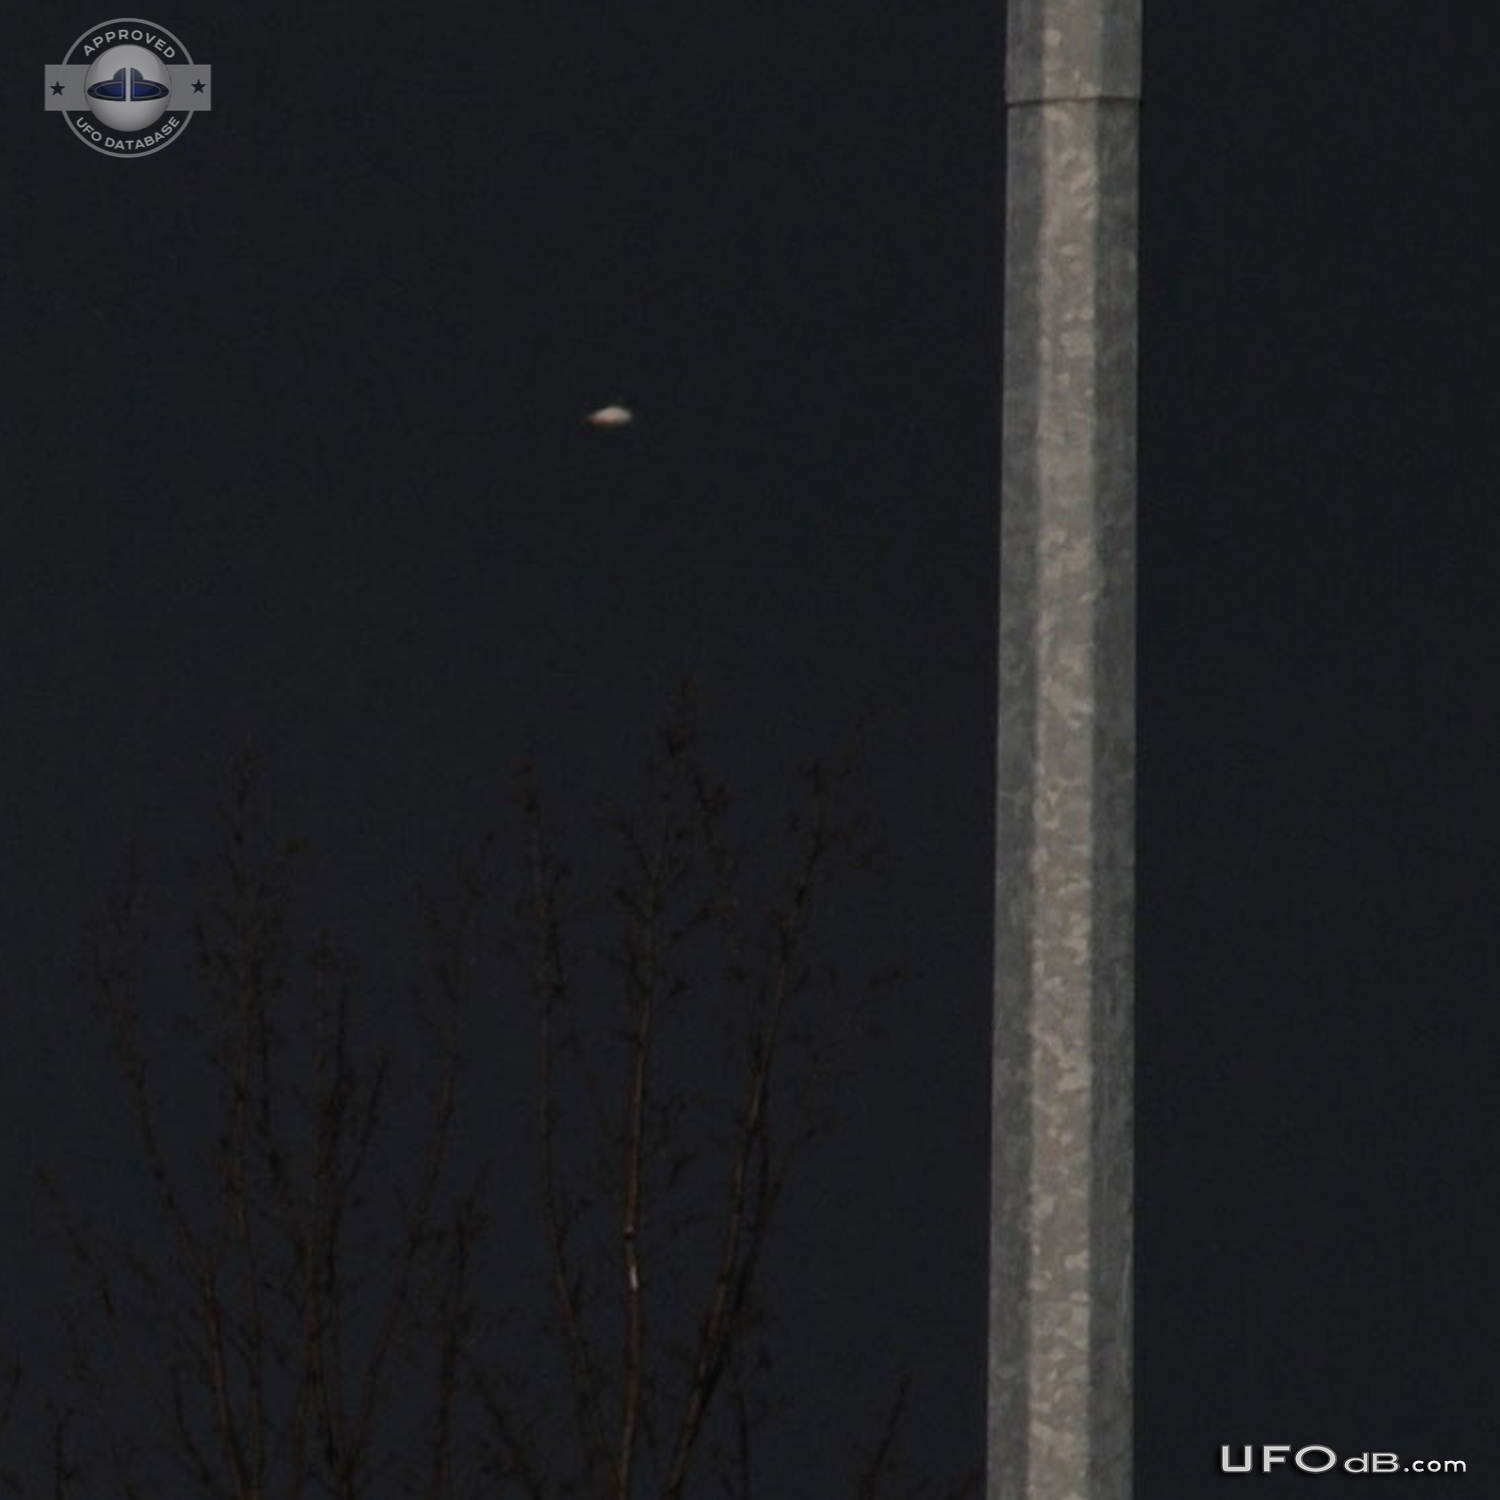 Saucer UFO appear on Soccer Game picture in Liverpool UK 2015 UFO Picture #626-3